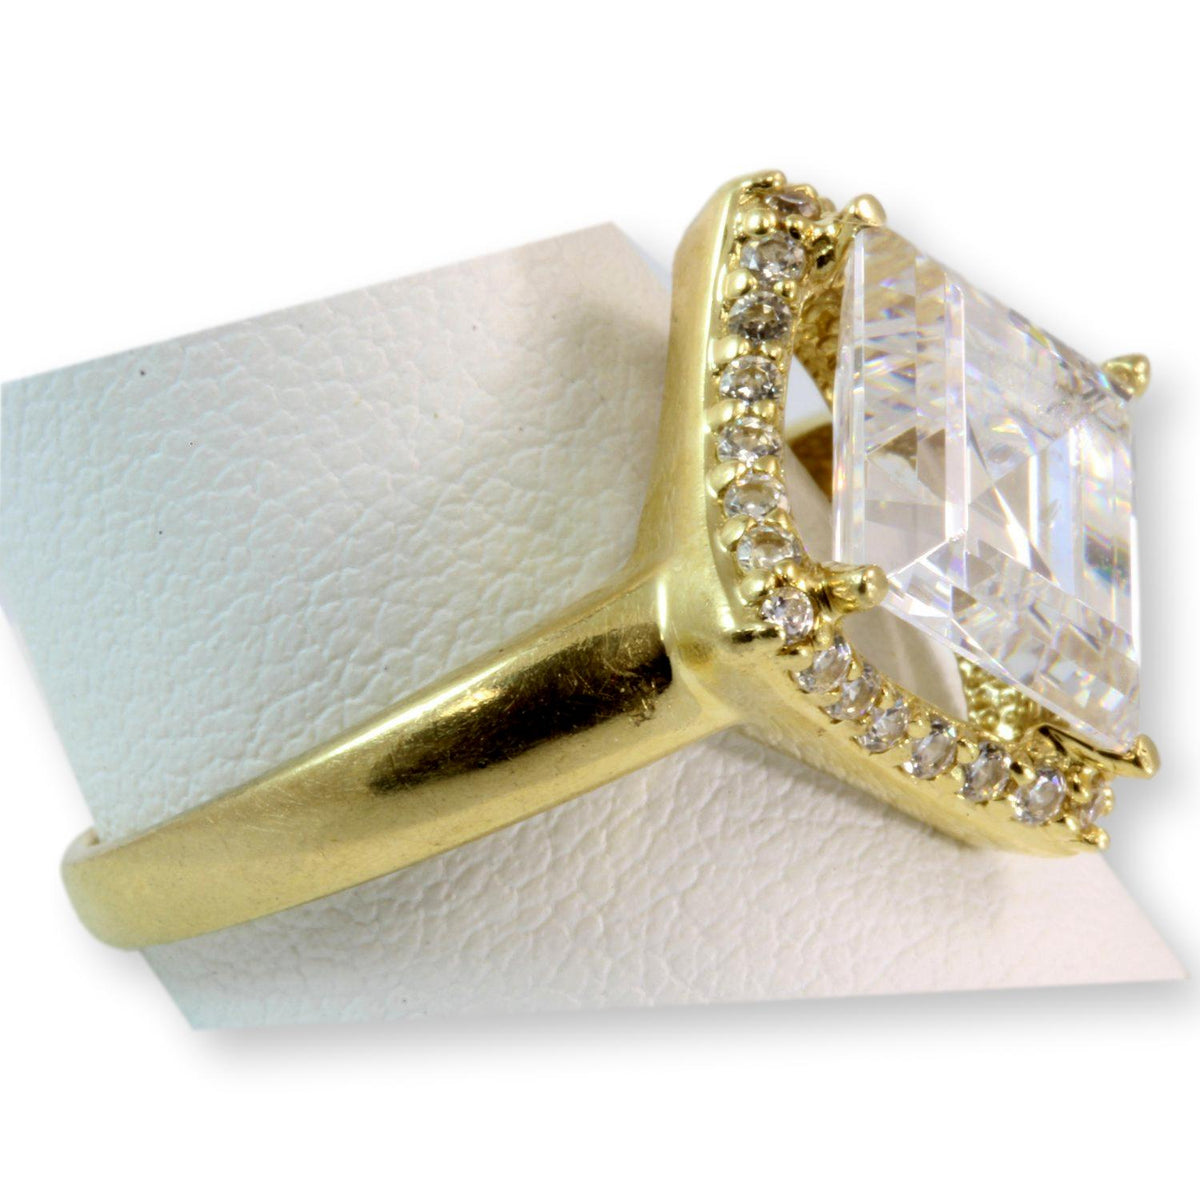 10mmx10mm Square Shaped CZ w/Halo 14K Yellow Gold Ring